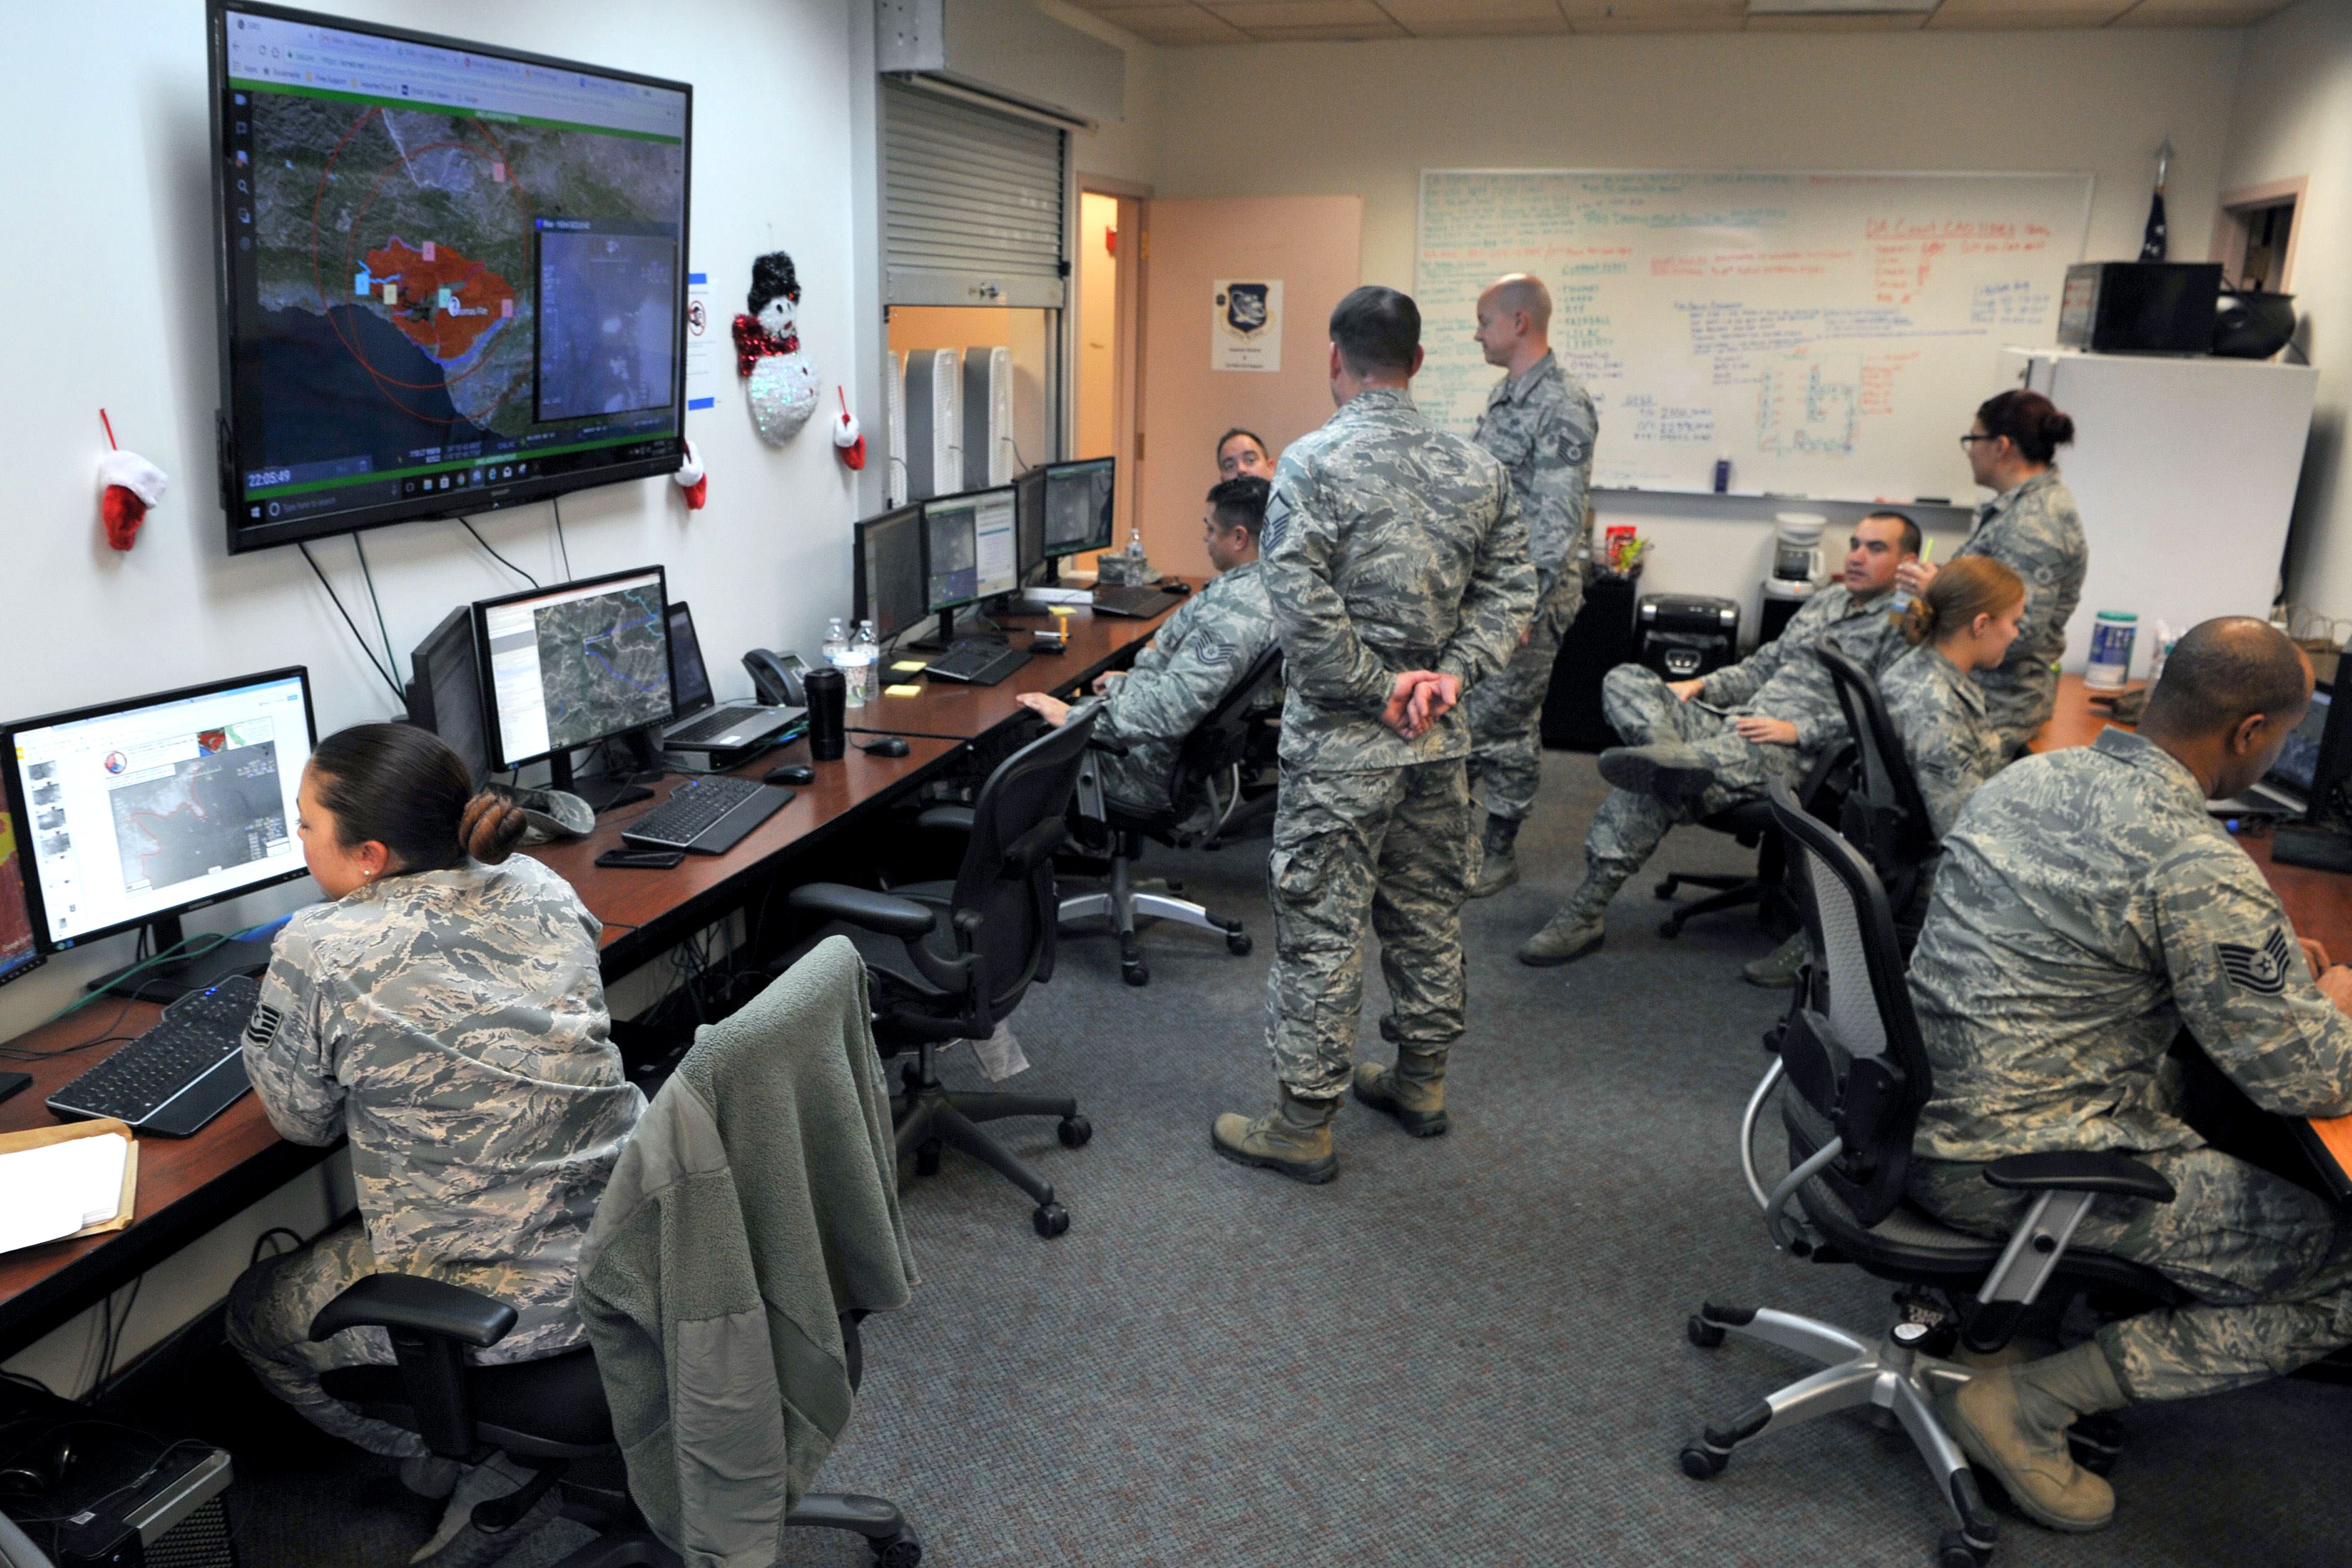 Airmen work on computers in an office.